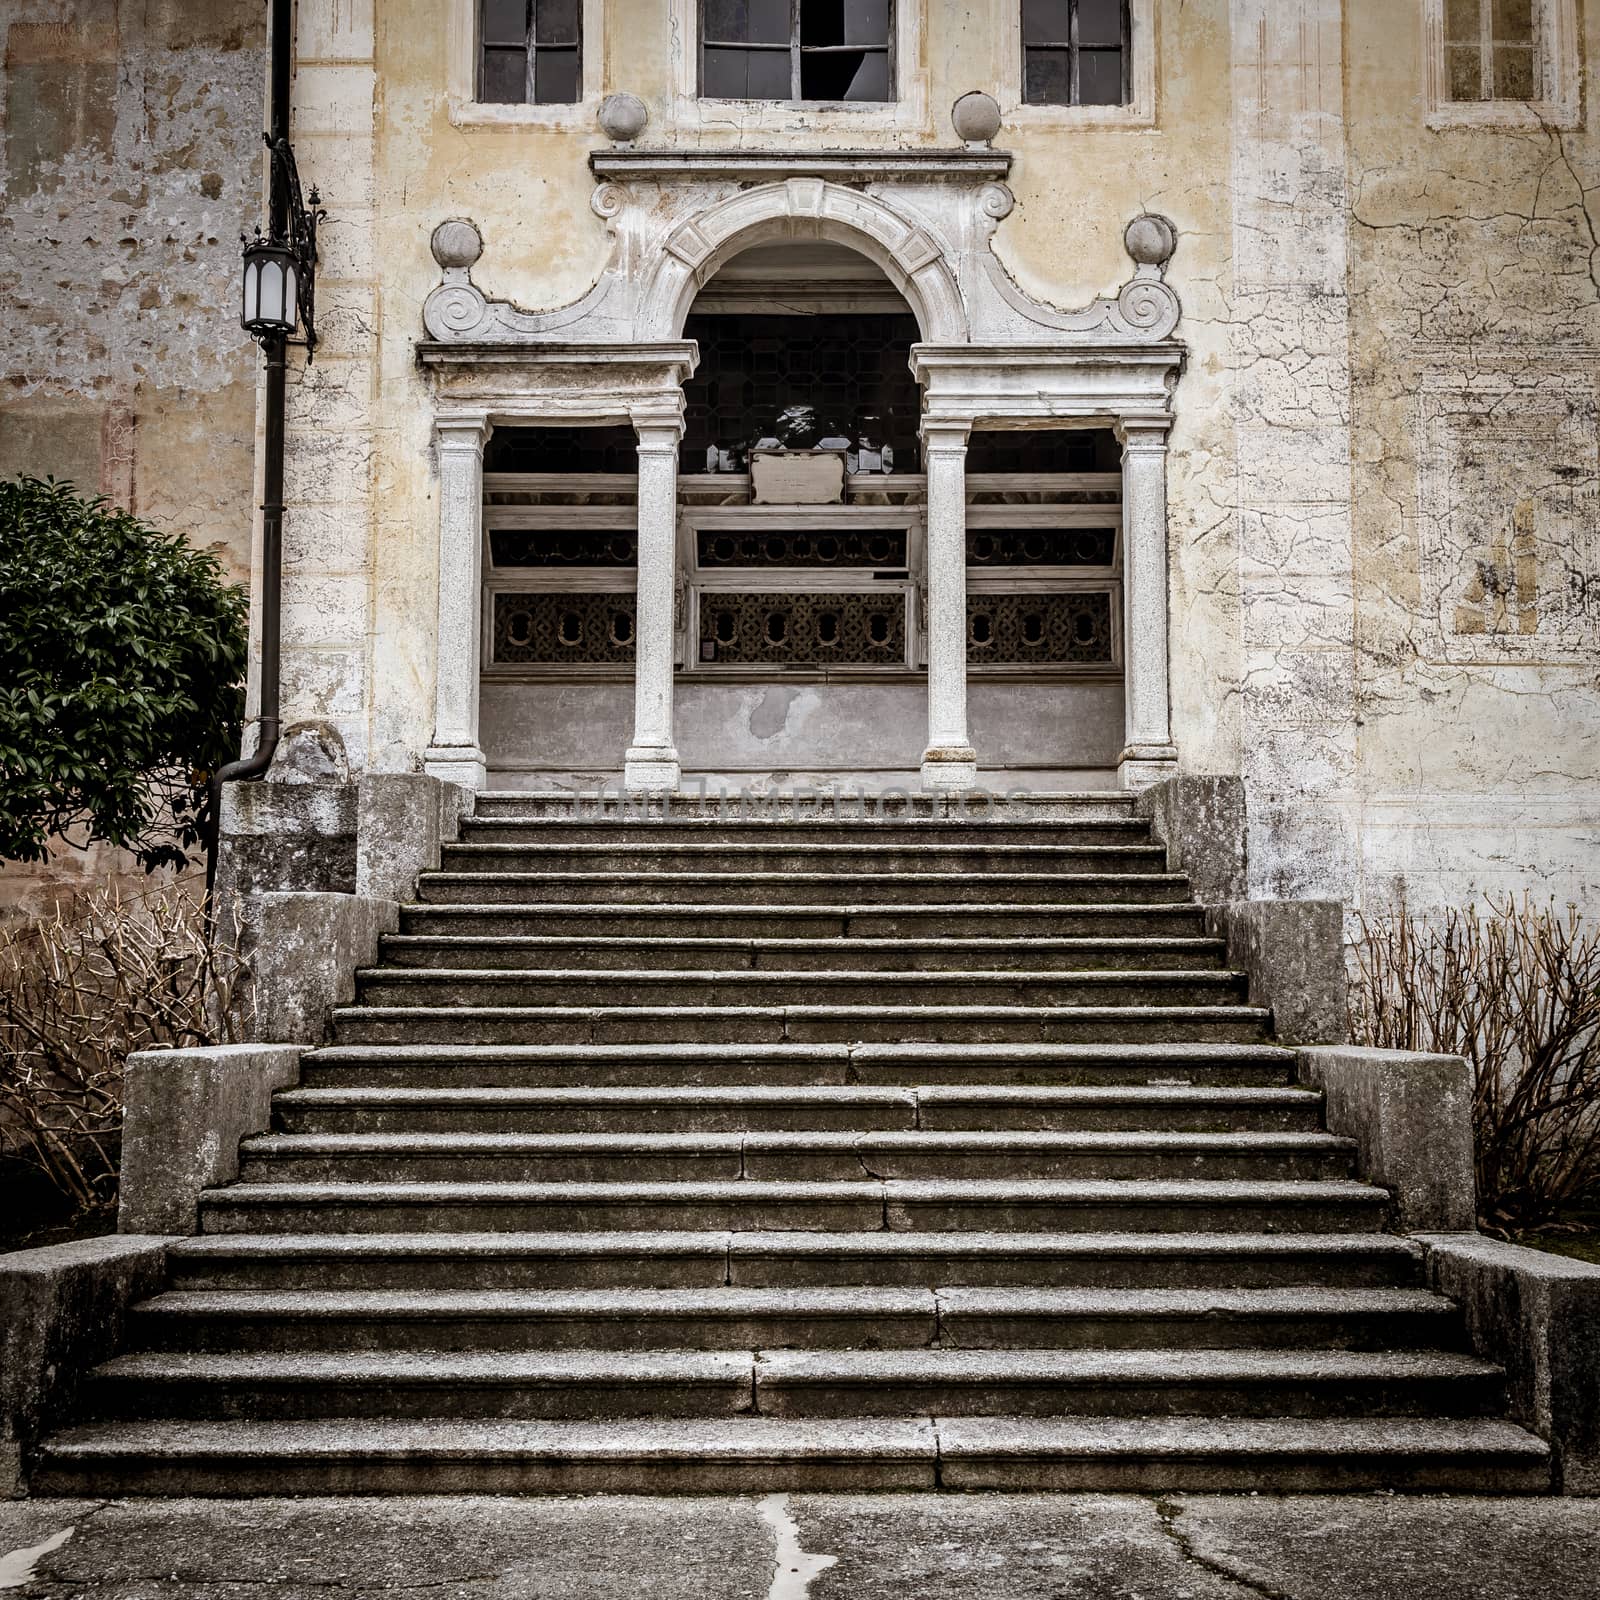 Mysterious old chapel with stair perspective by Perseomedusa